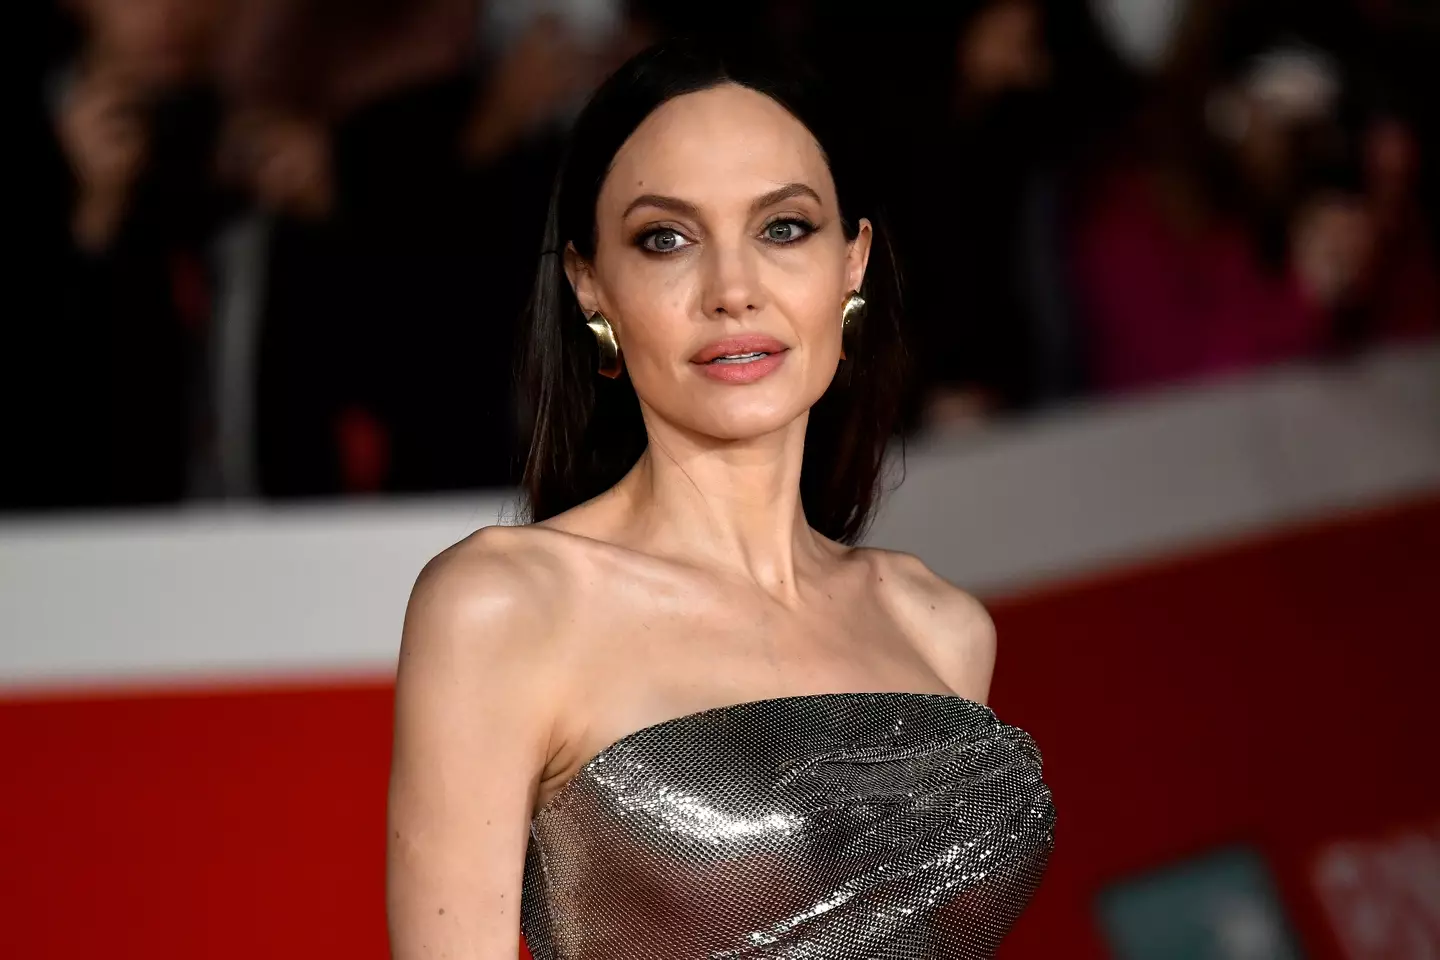 Jolie is reportedly calling for a reform to how domestic violence cases are handled.